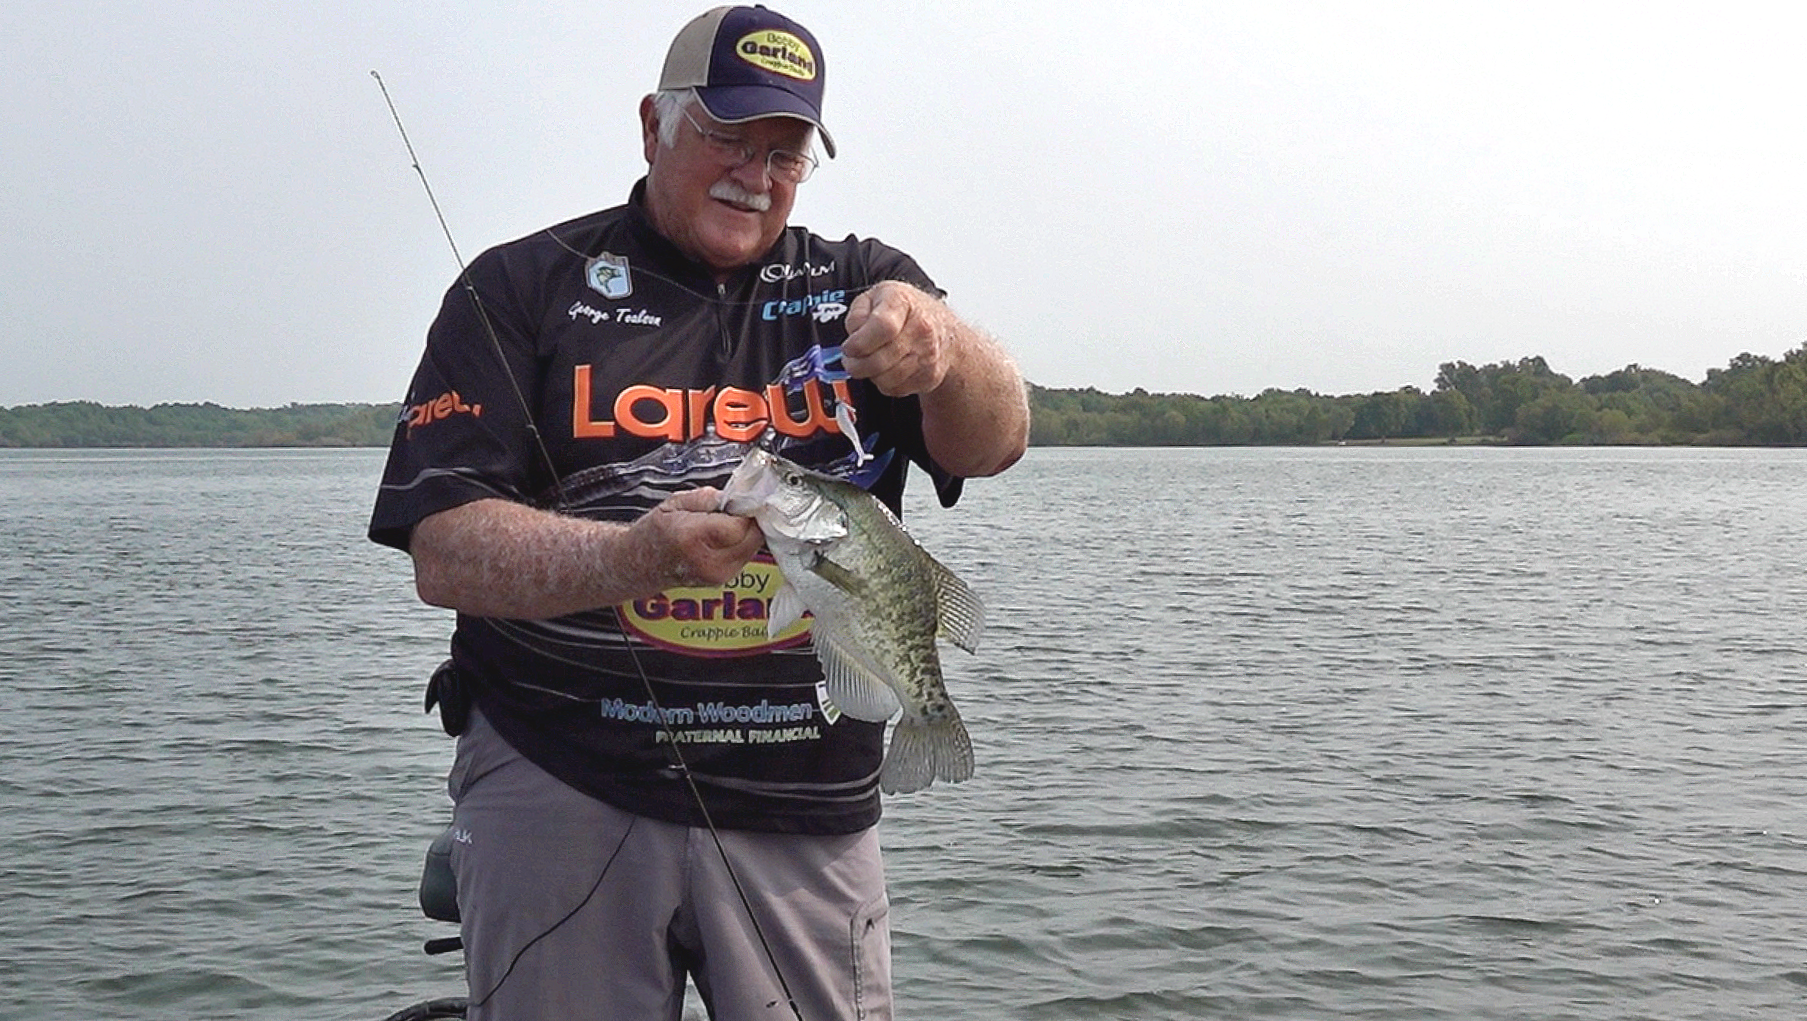 George Toalson with crappie